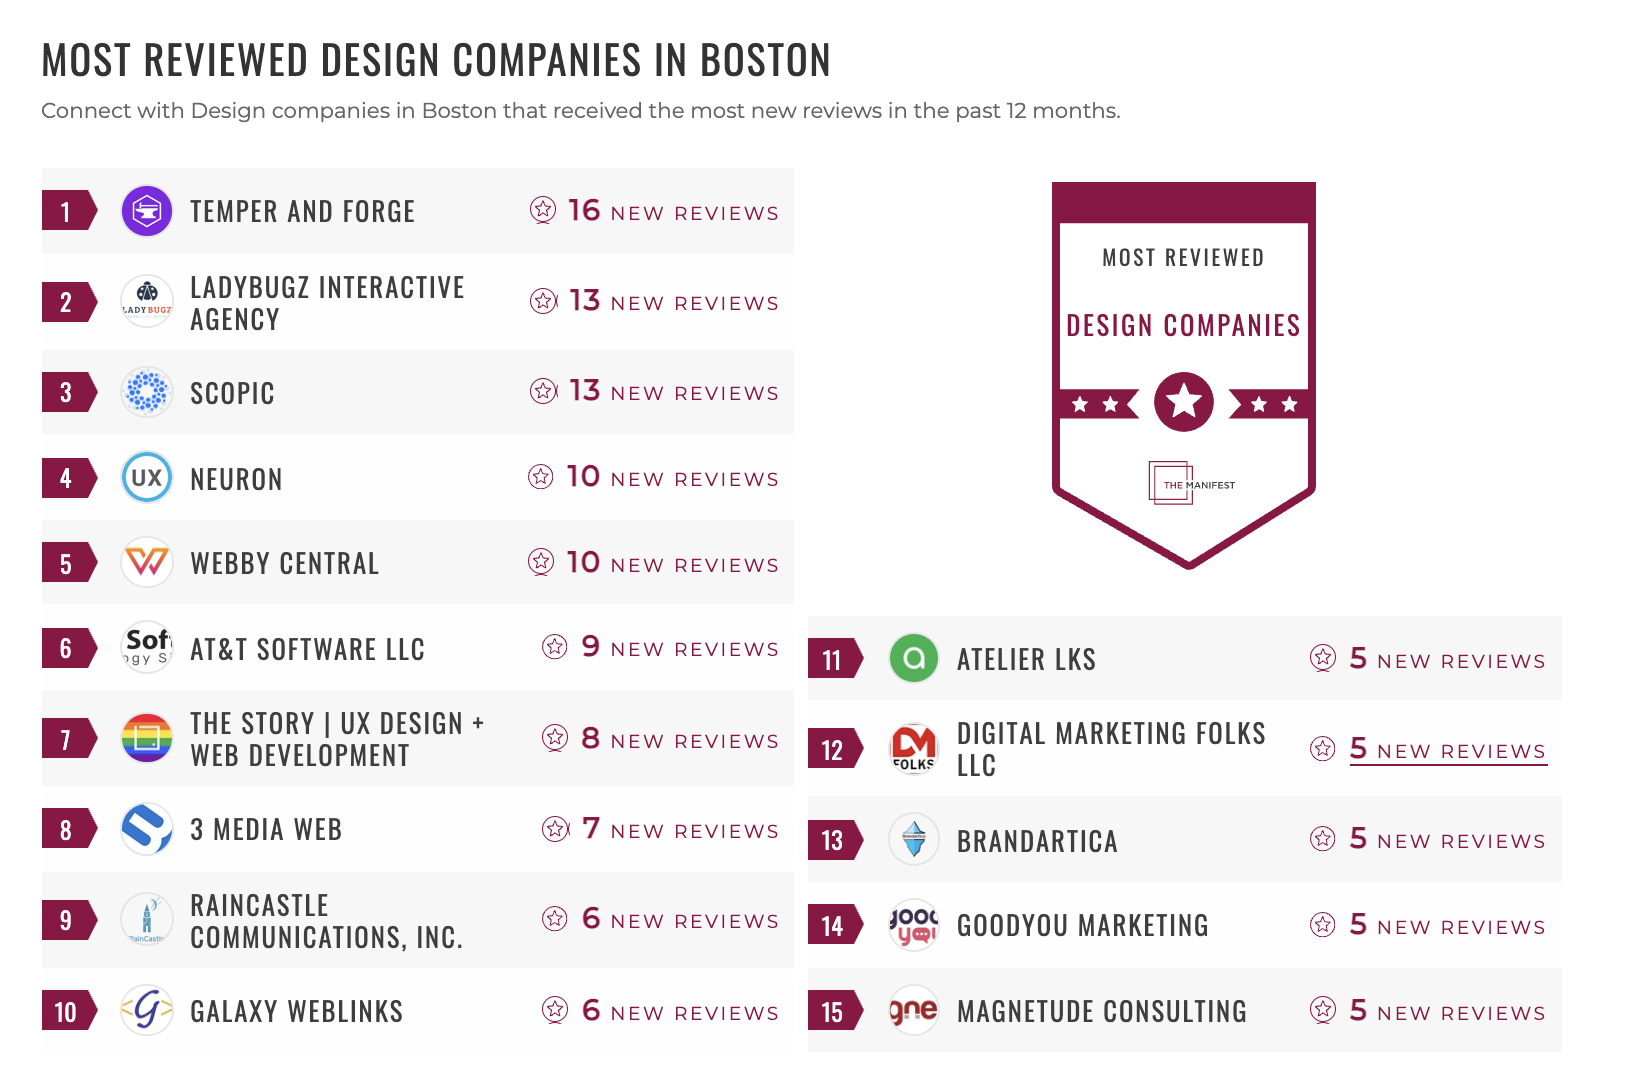 Most Reviewed Design Companies in Boston